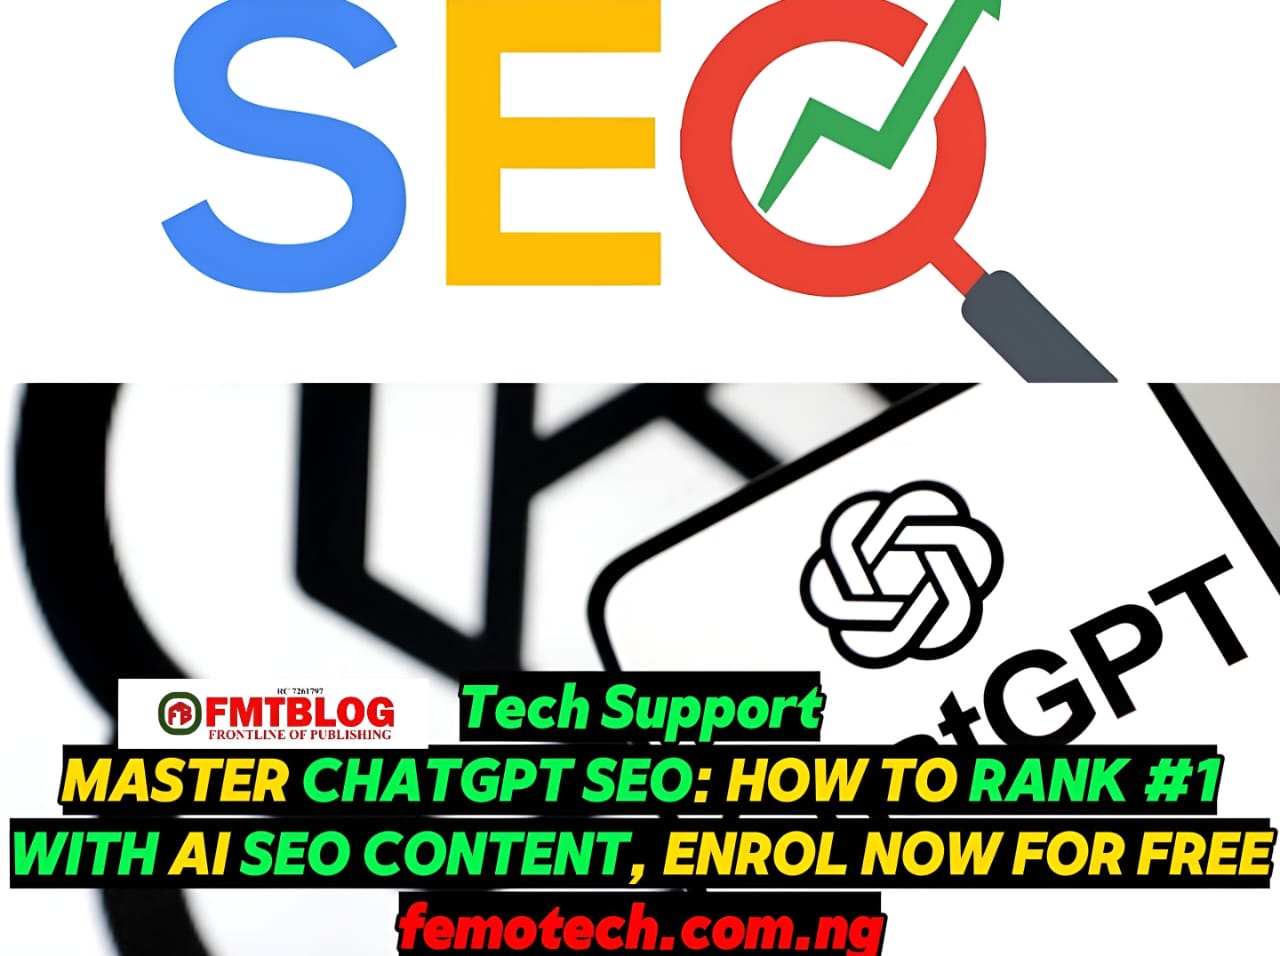 Master ChatGPT SEO : How To Rank #1 With AI SEO Content, Enrol Now For Free